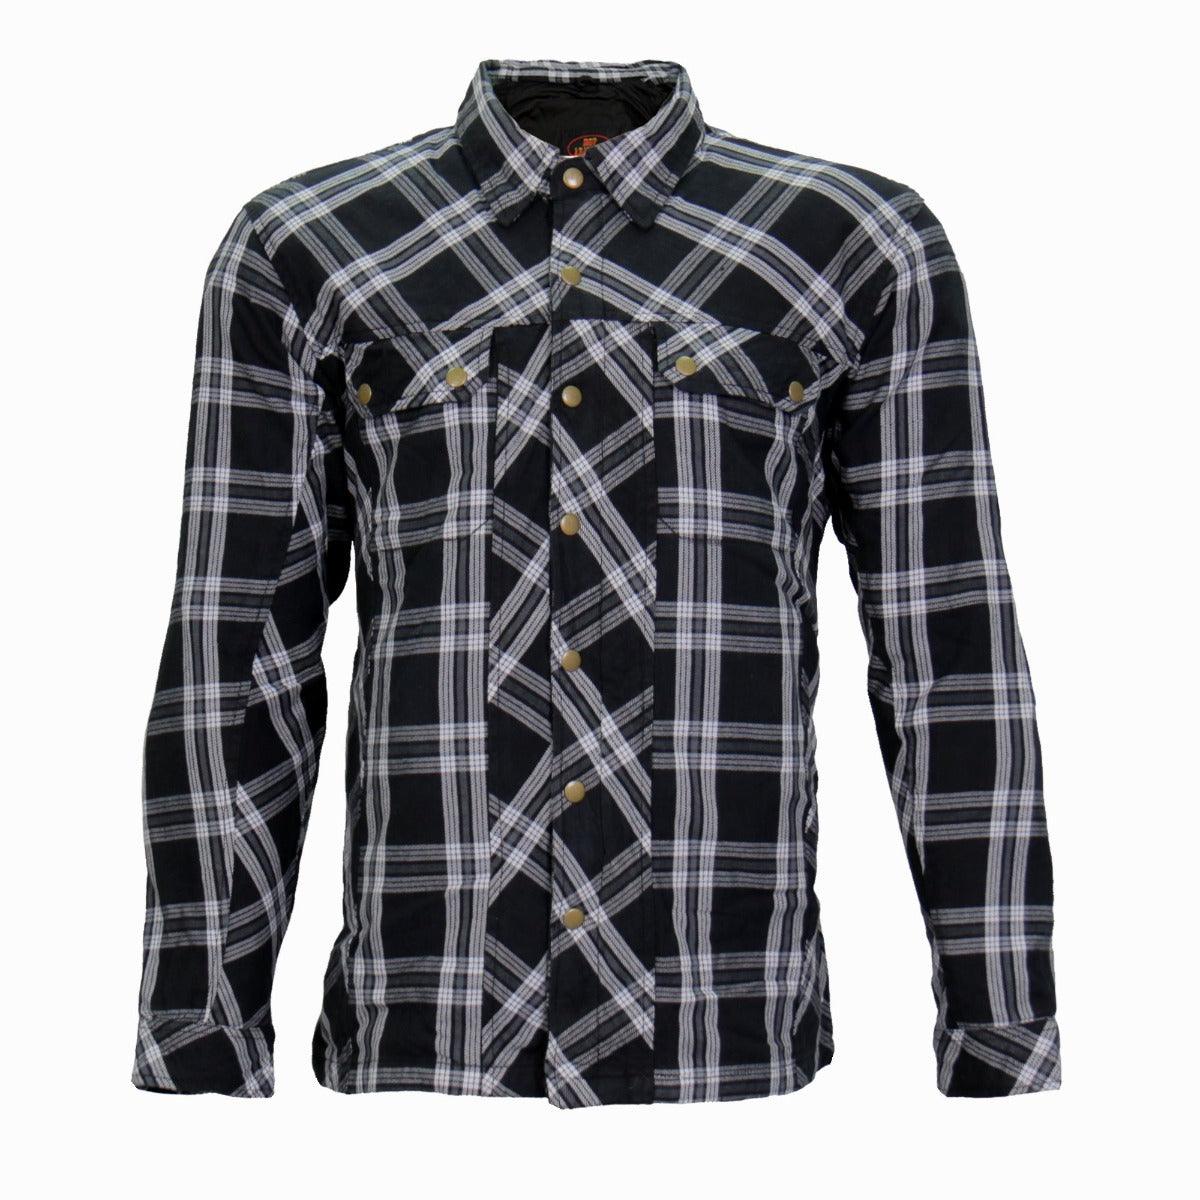 Hot Leathers Men's Armored Black And White Flannel Jacket - American Legend Rider